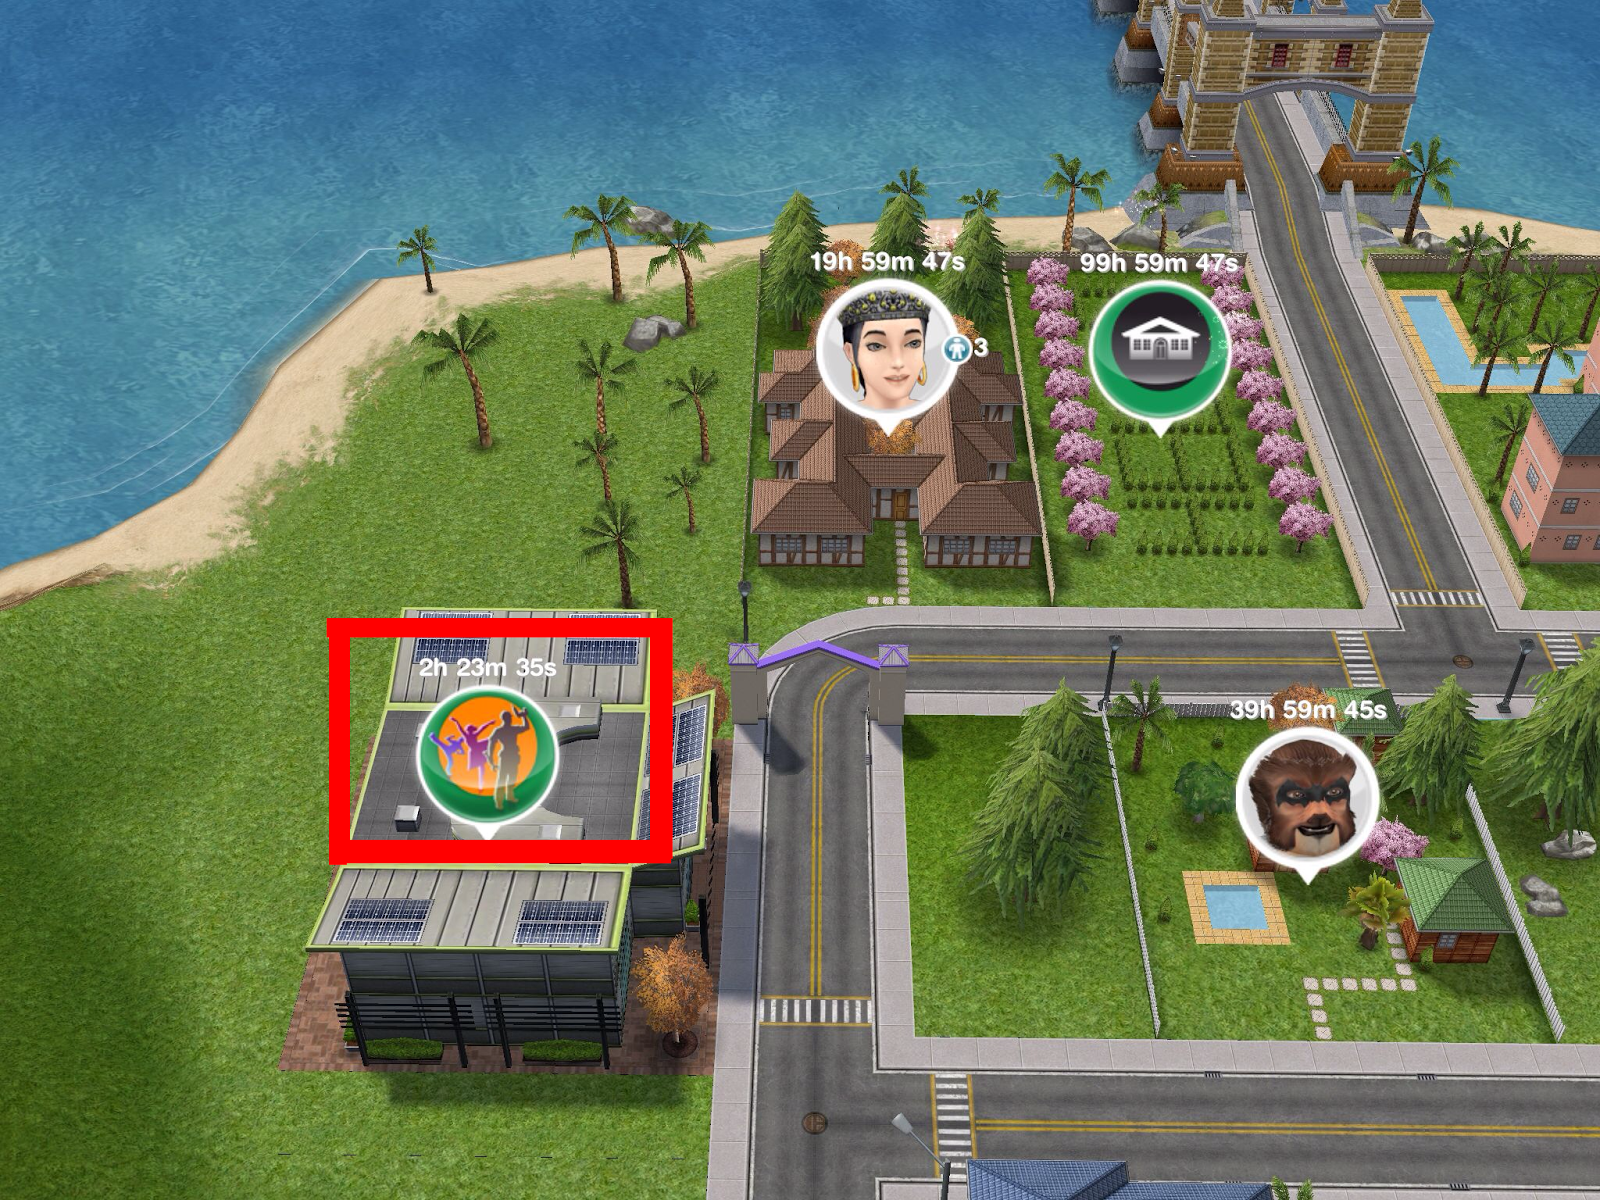 Where's the On Sims Free Play Community Center